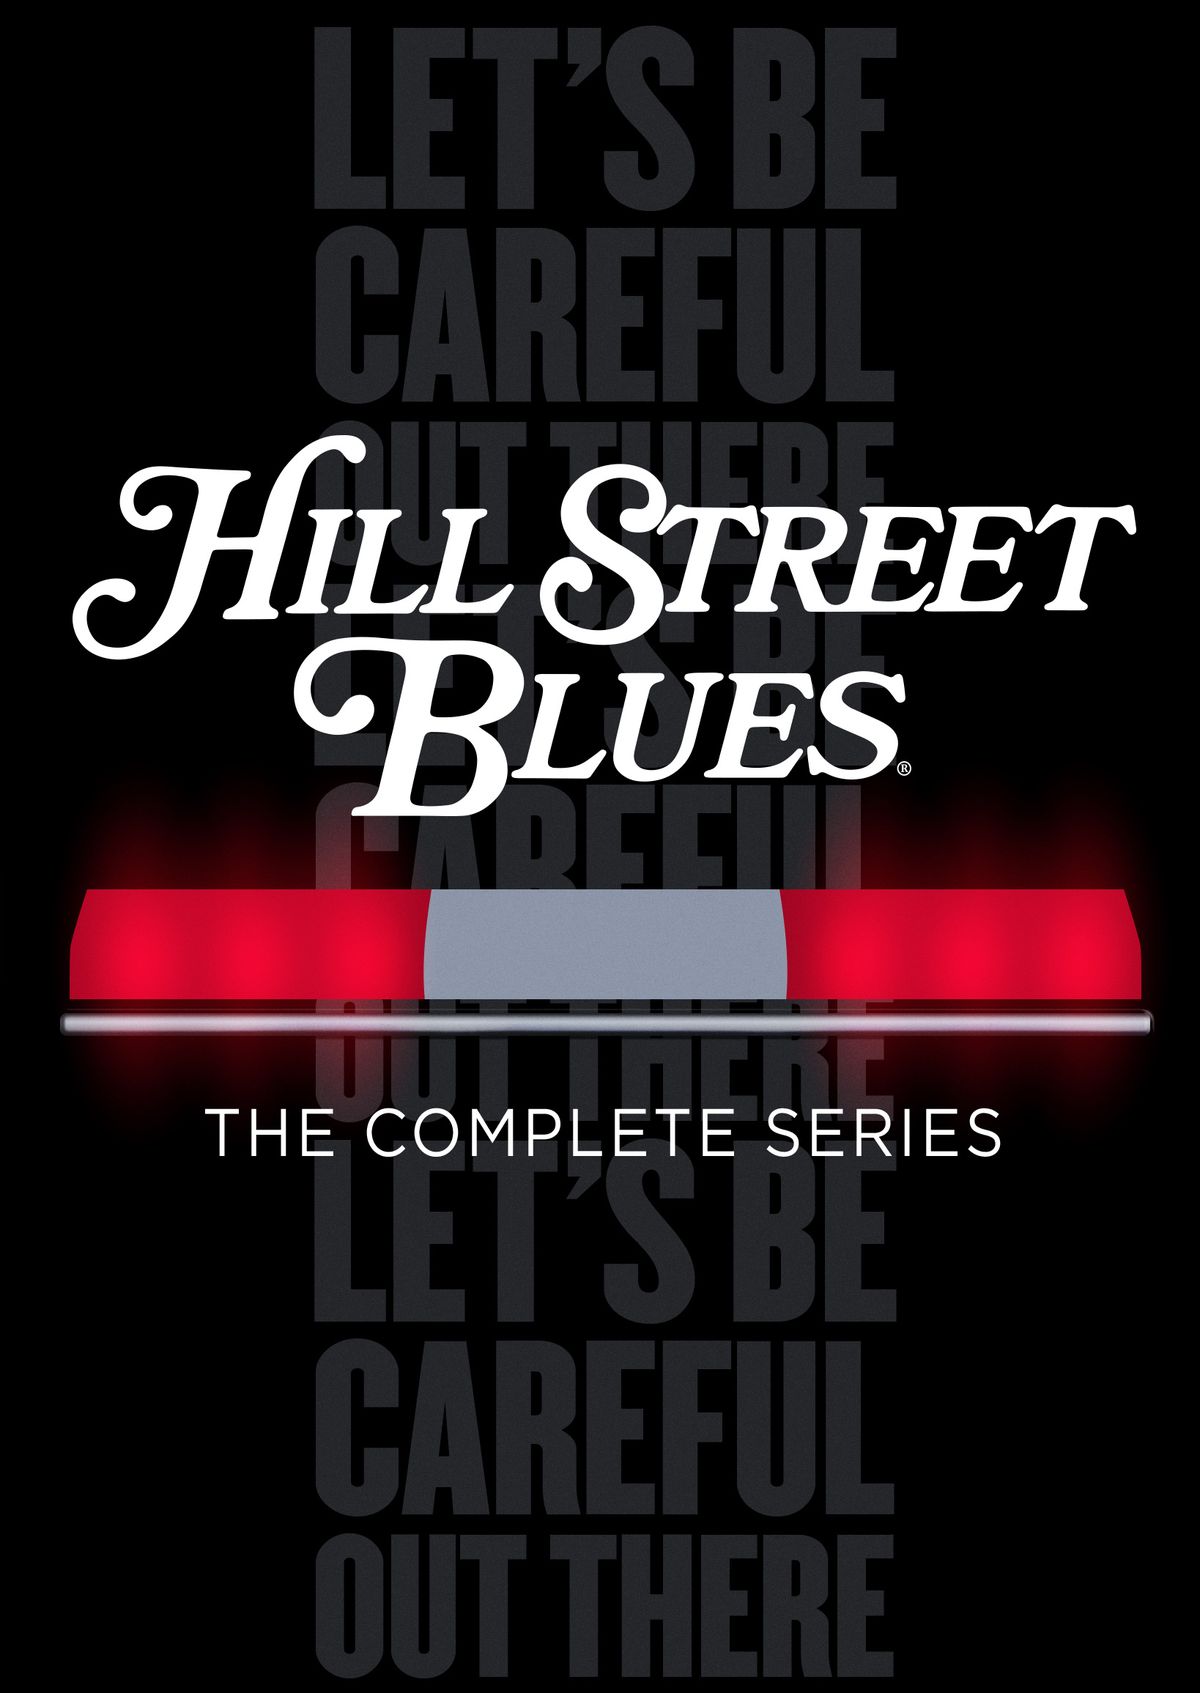 “Hill Street Blues: The Complete Series”